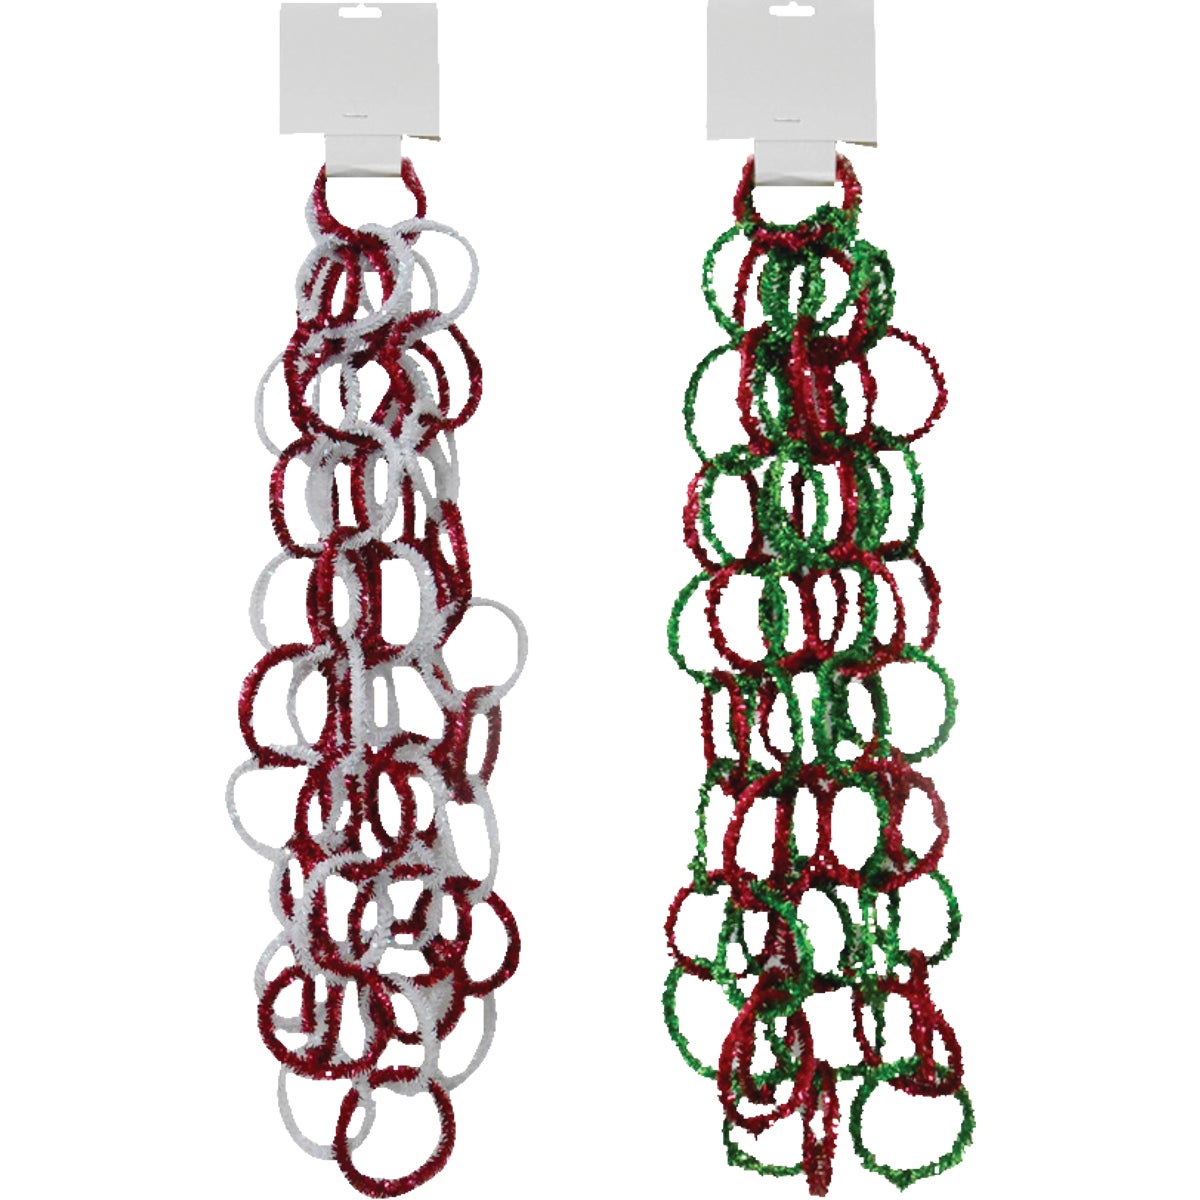 Item 900351, 8-foot tinsel chain garland. Ideal for any decorating style.